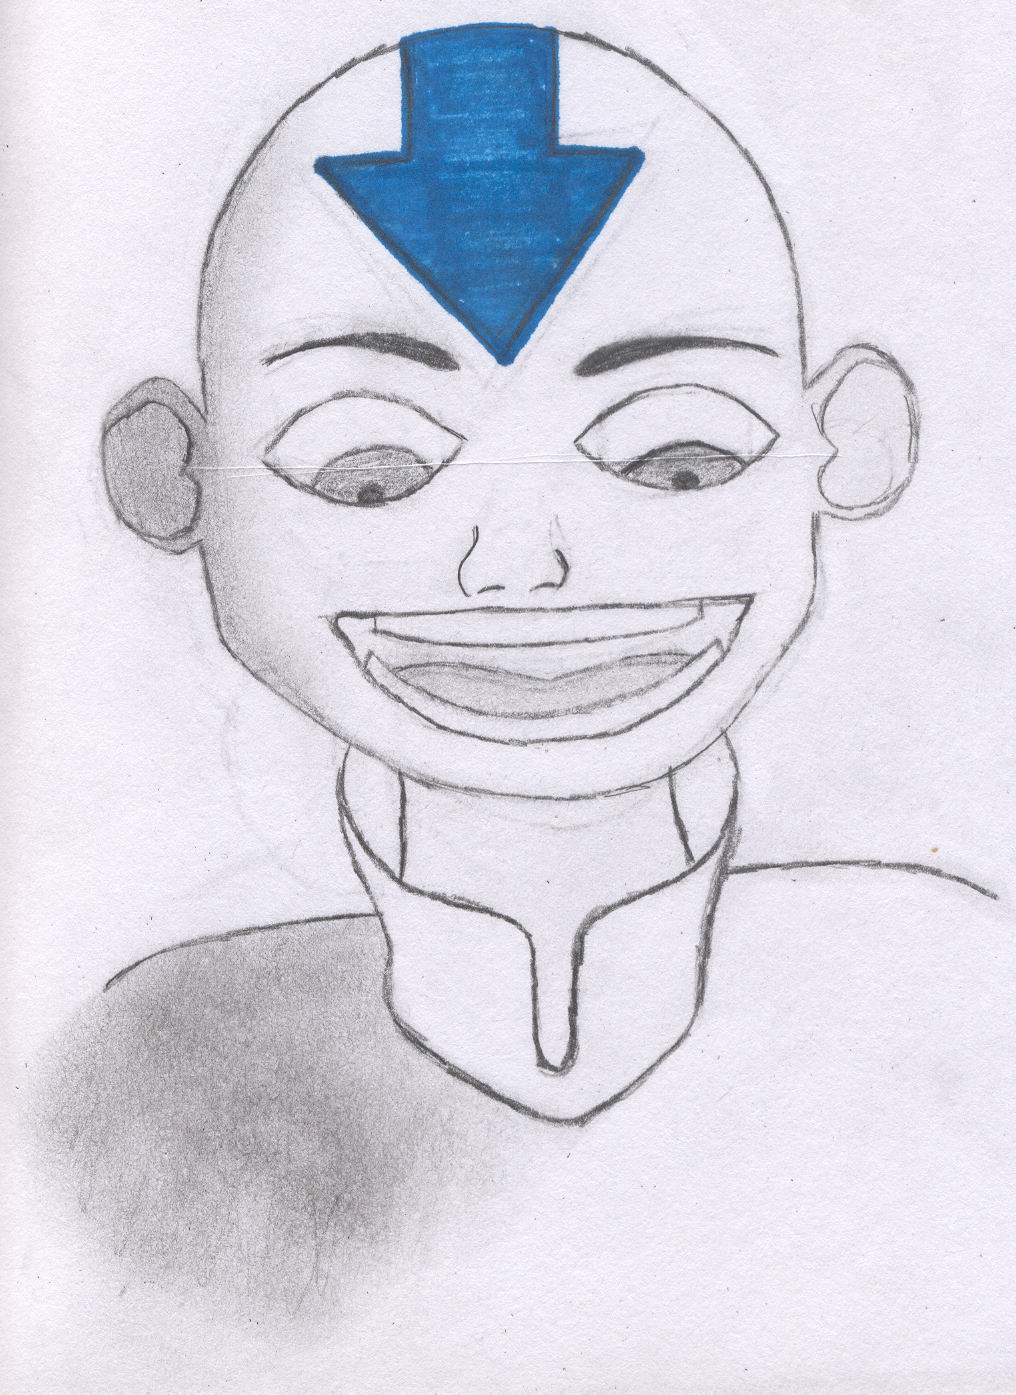 Aang by LSpay13